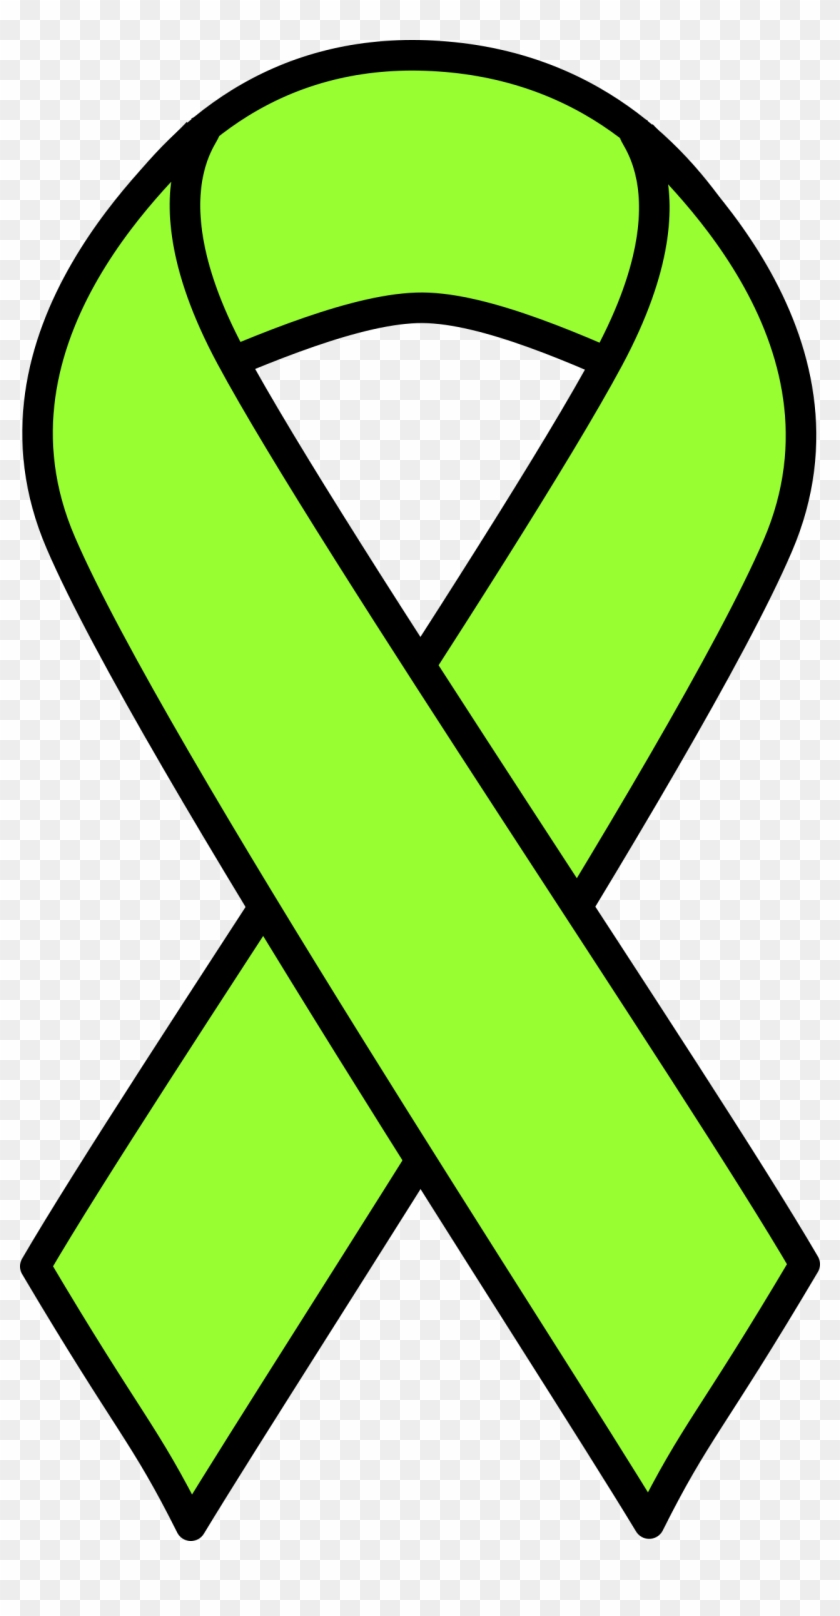 This Free Icons Png Design Of Lime Lymphoma Ribbon Clipart